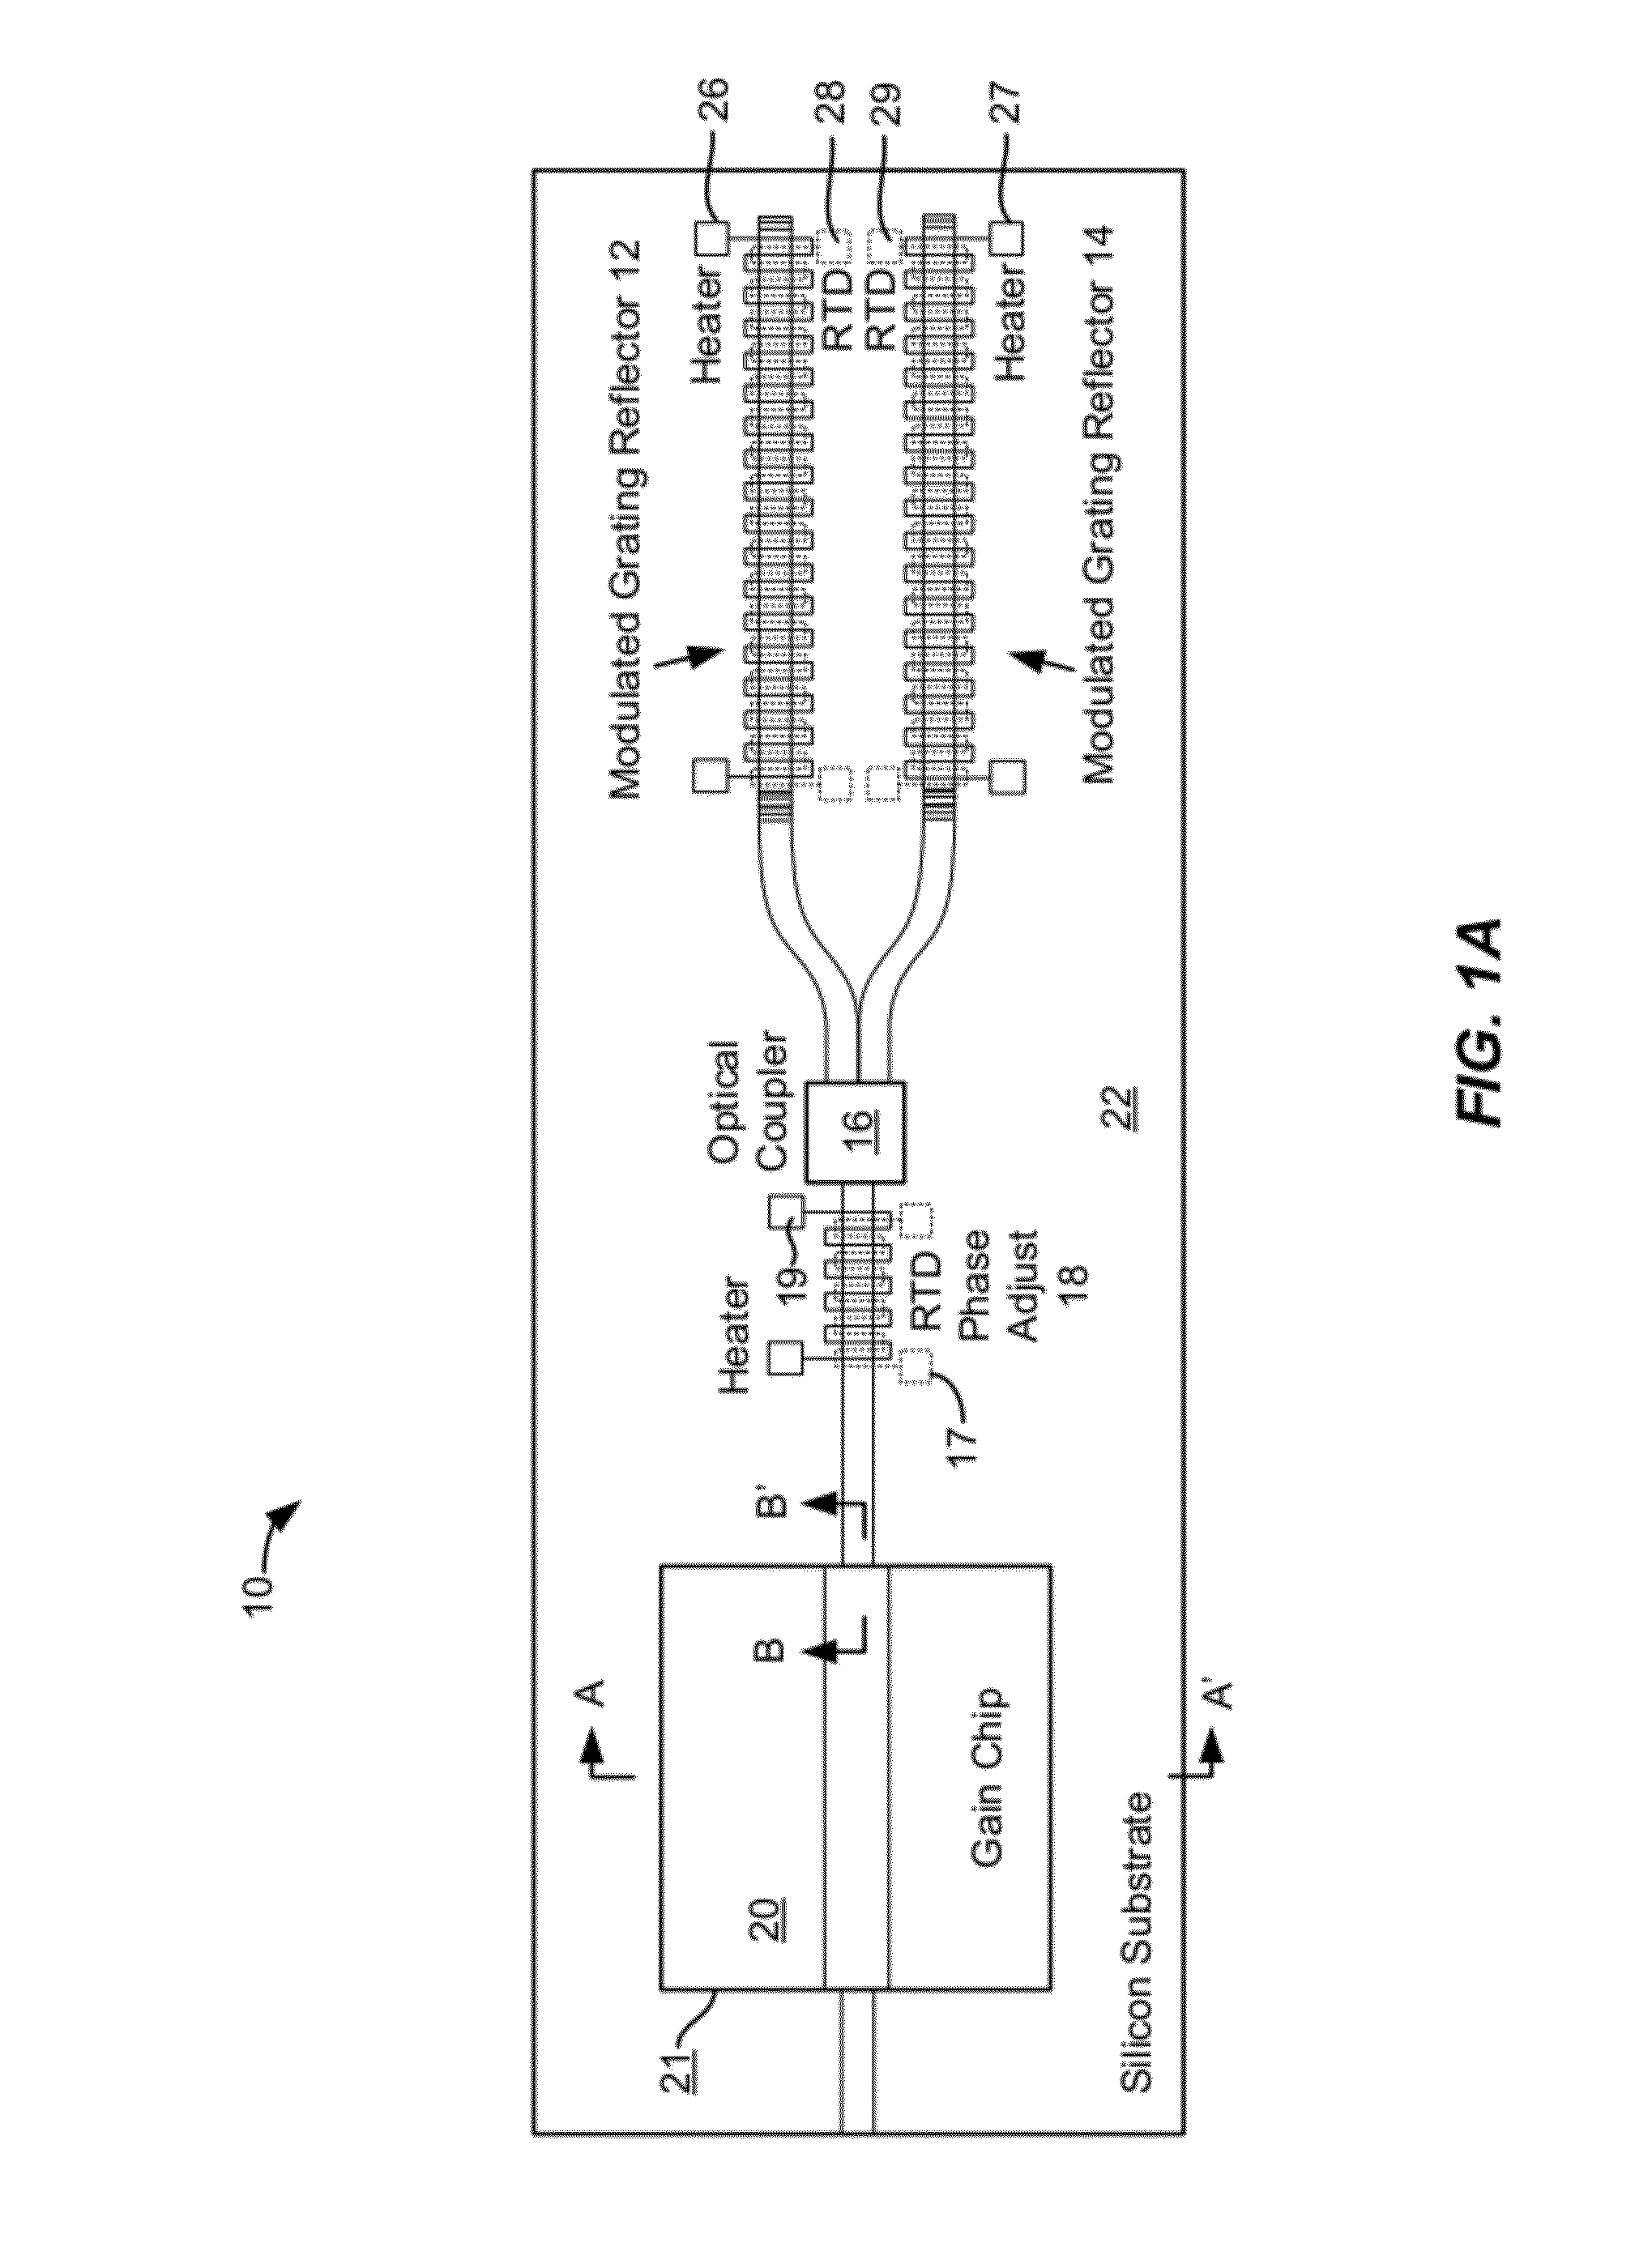 Method and system for hybrid integration of a tunable laser and a mach zehnder modulator